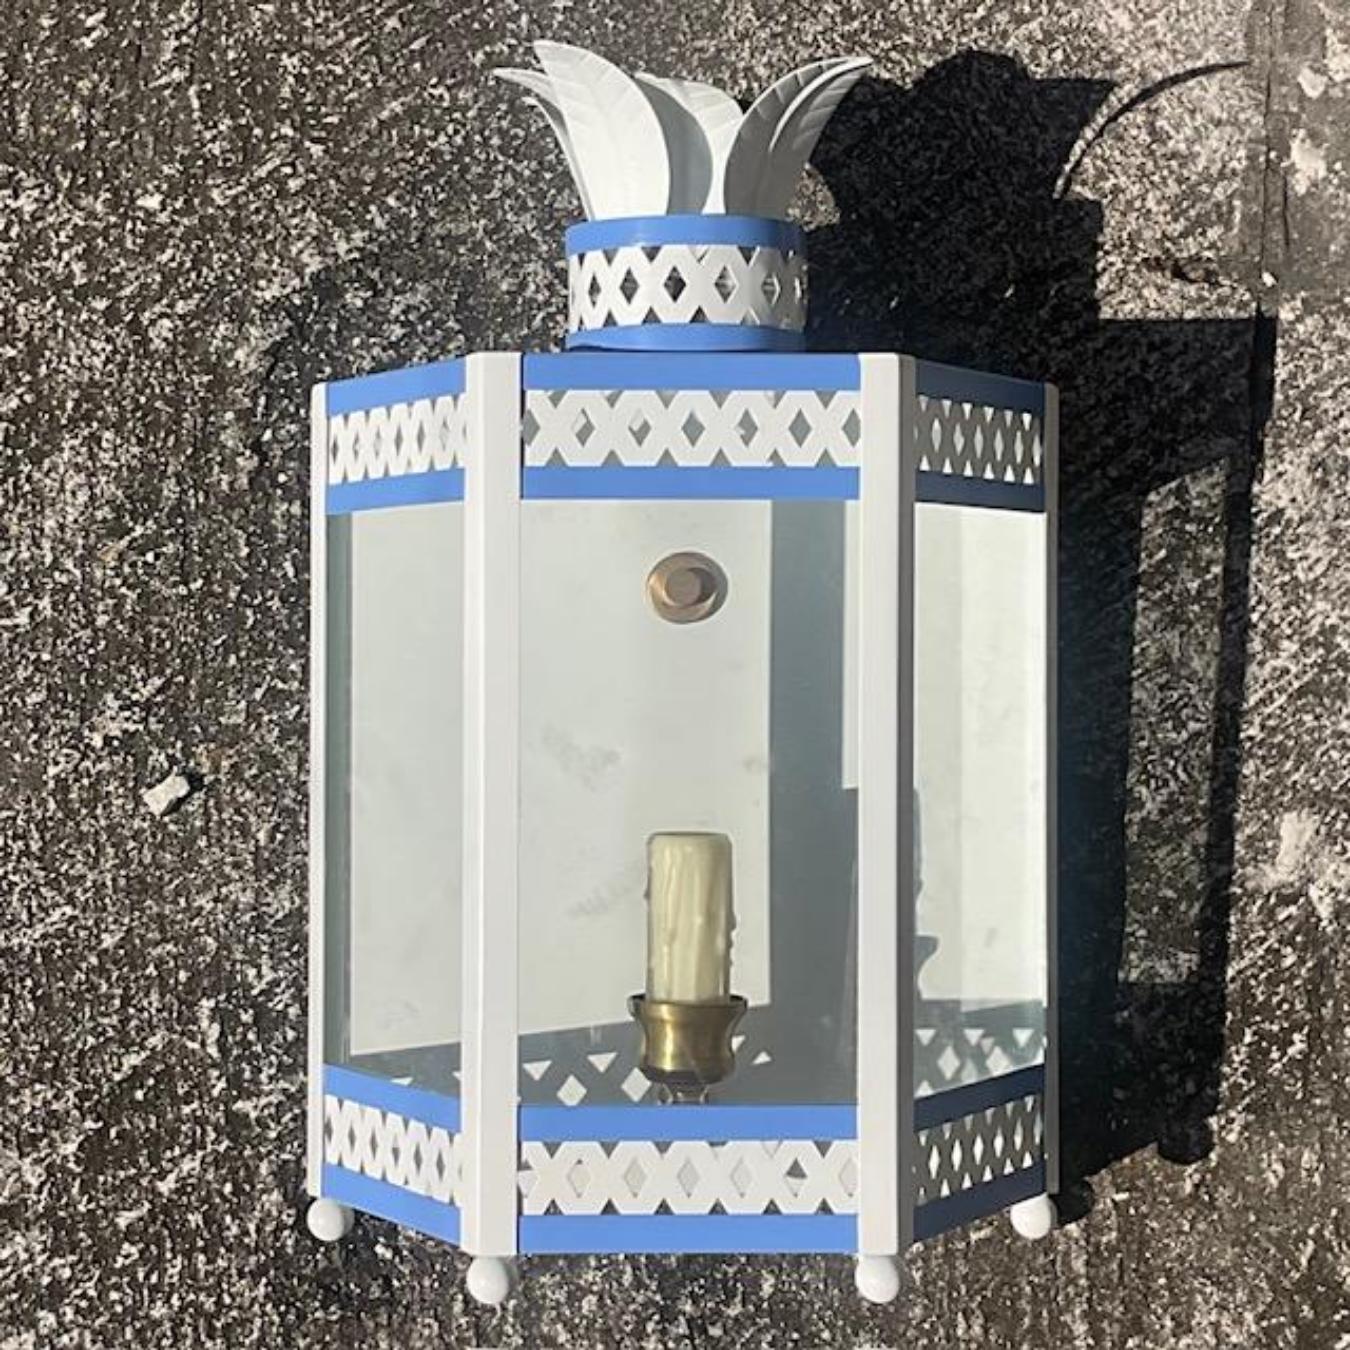 A stunning Contemporary wall sconce. Made by the fabulous Coleen group and marked on the back. Purchased, but ne over installed. It’s in great shape. Acquired from a Palm Beach estate.